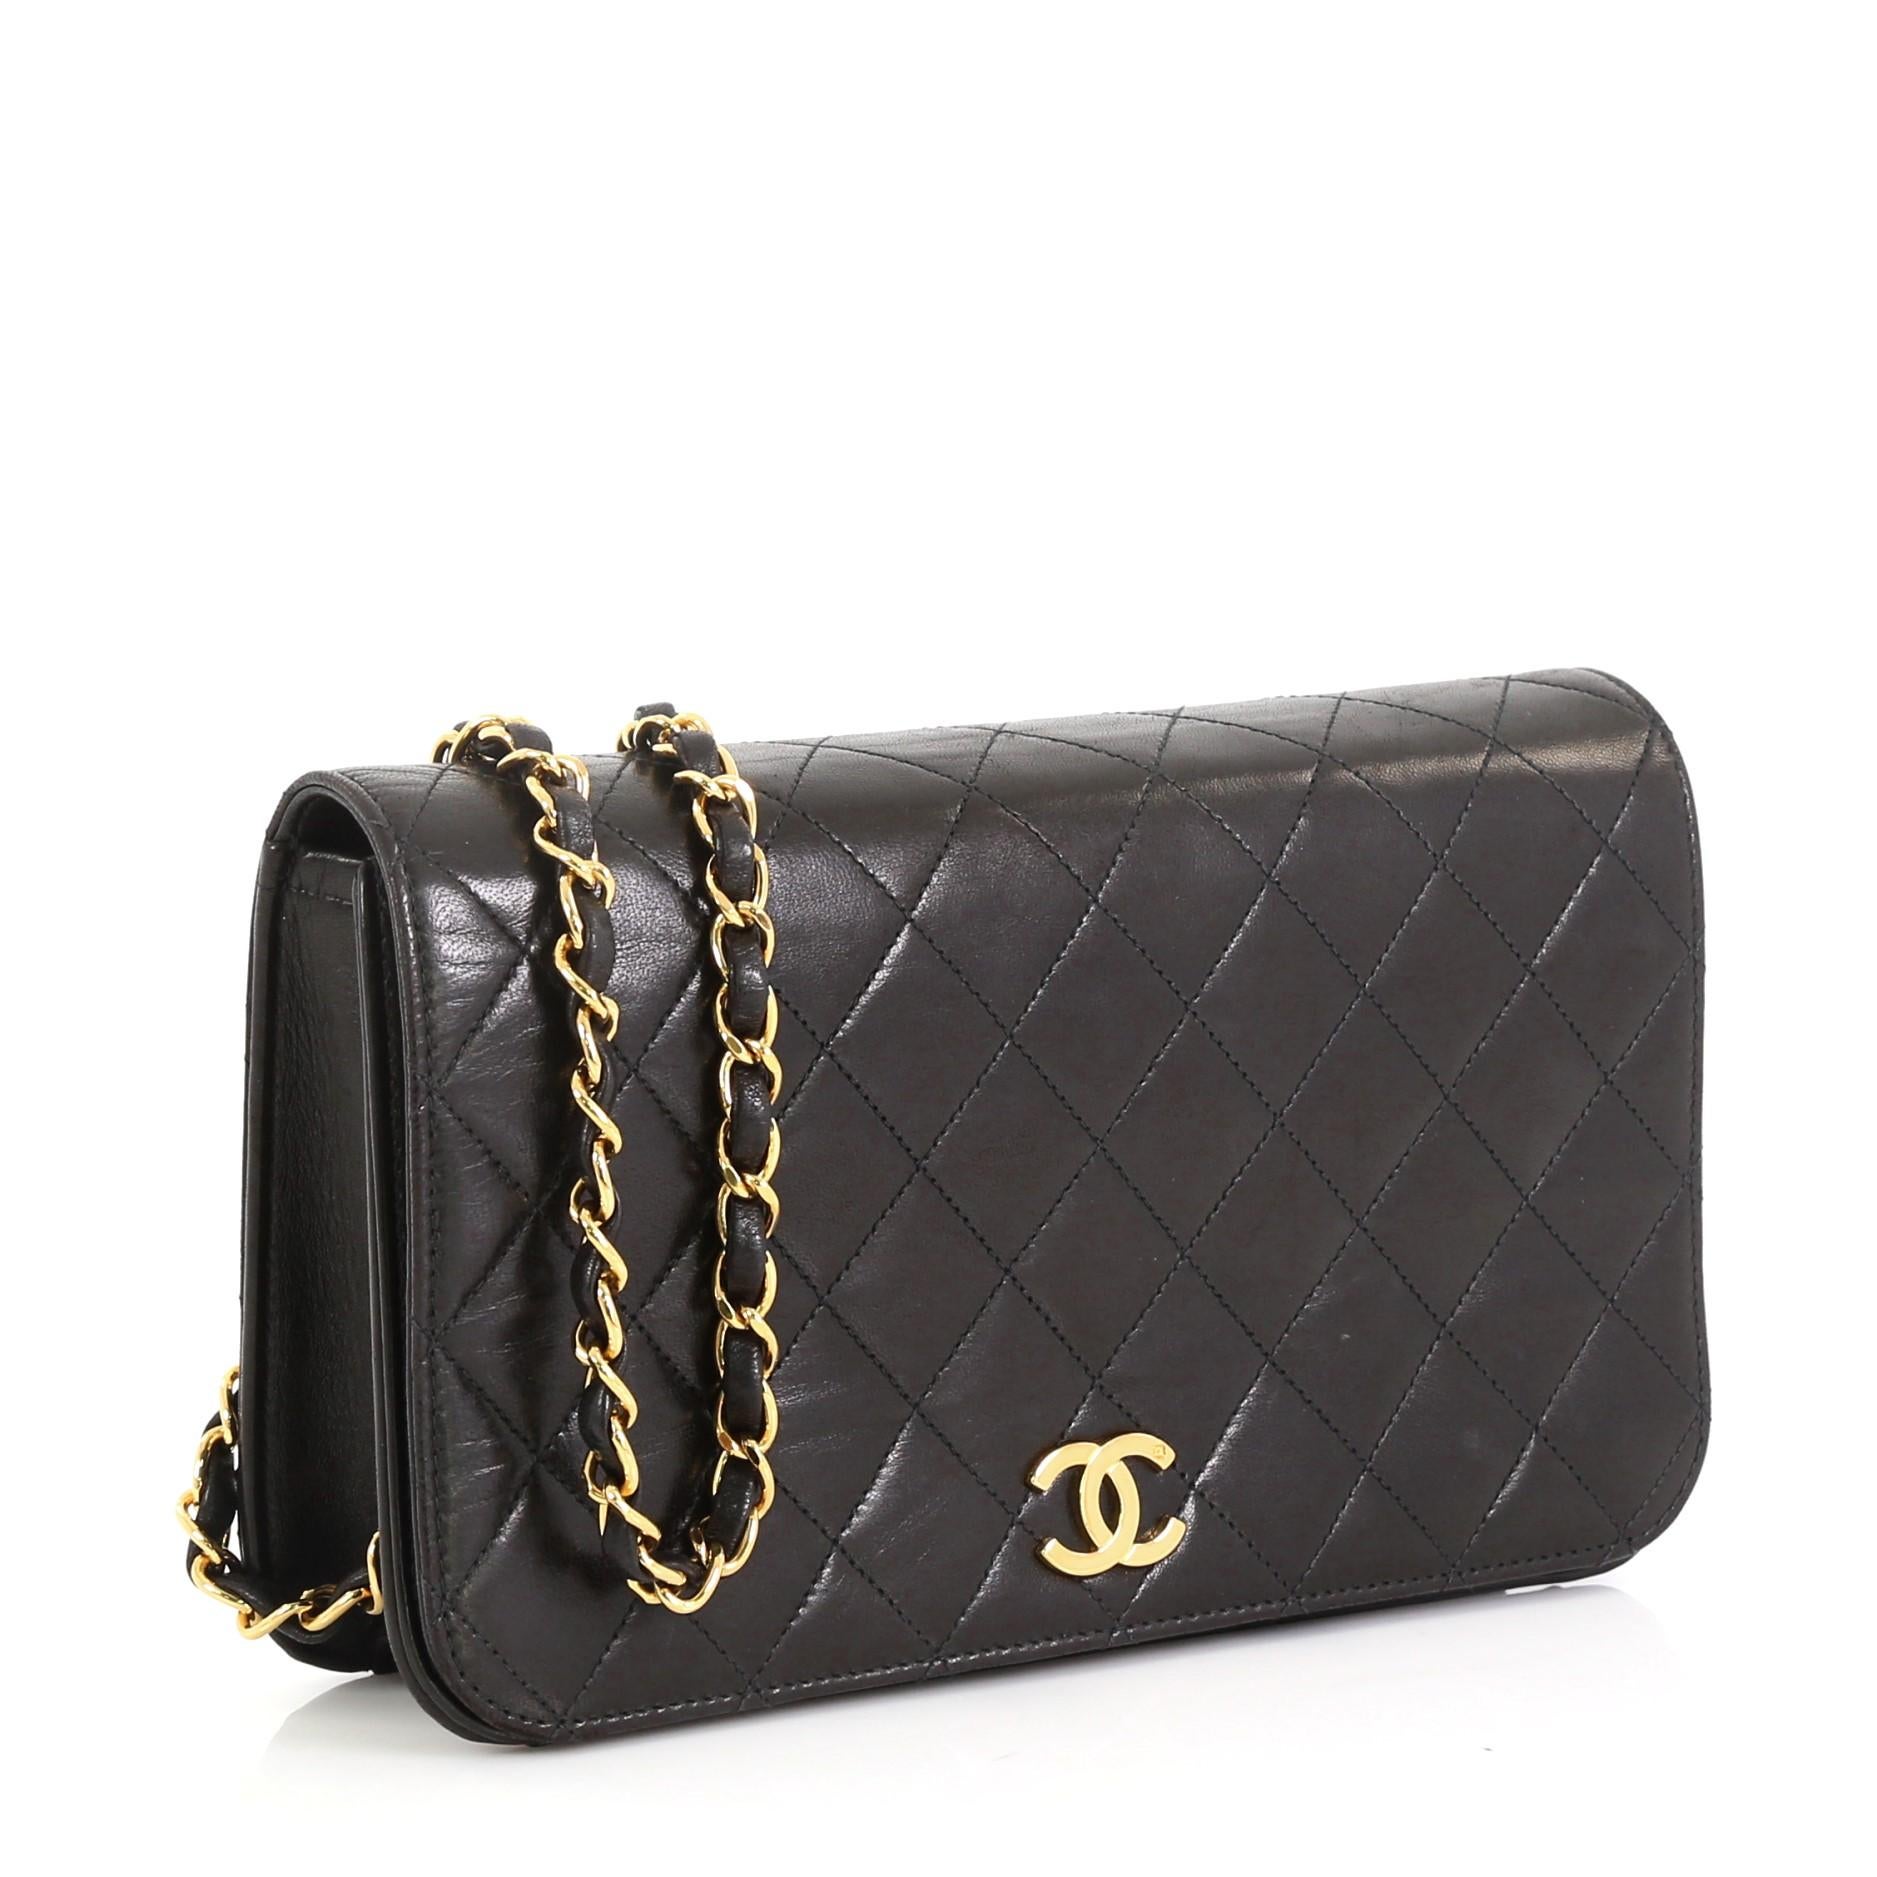 Black Chanel Vintage 3 Way Full Flap Bag Quilted Lambskin Small